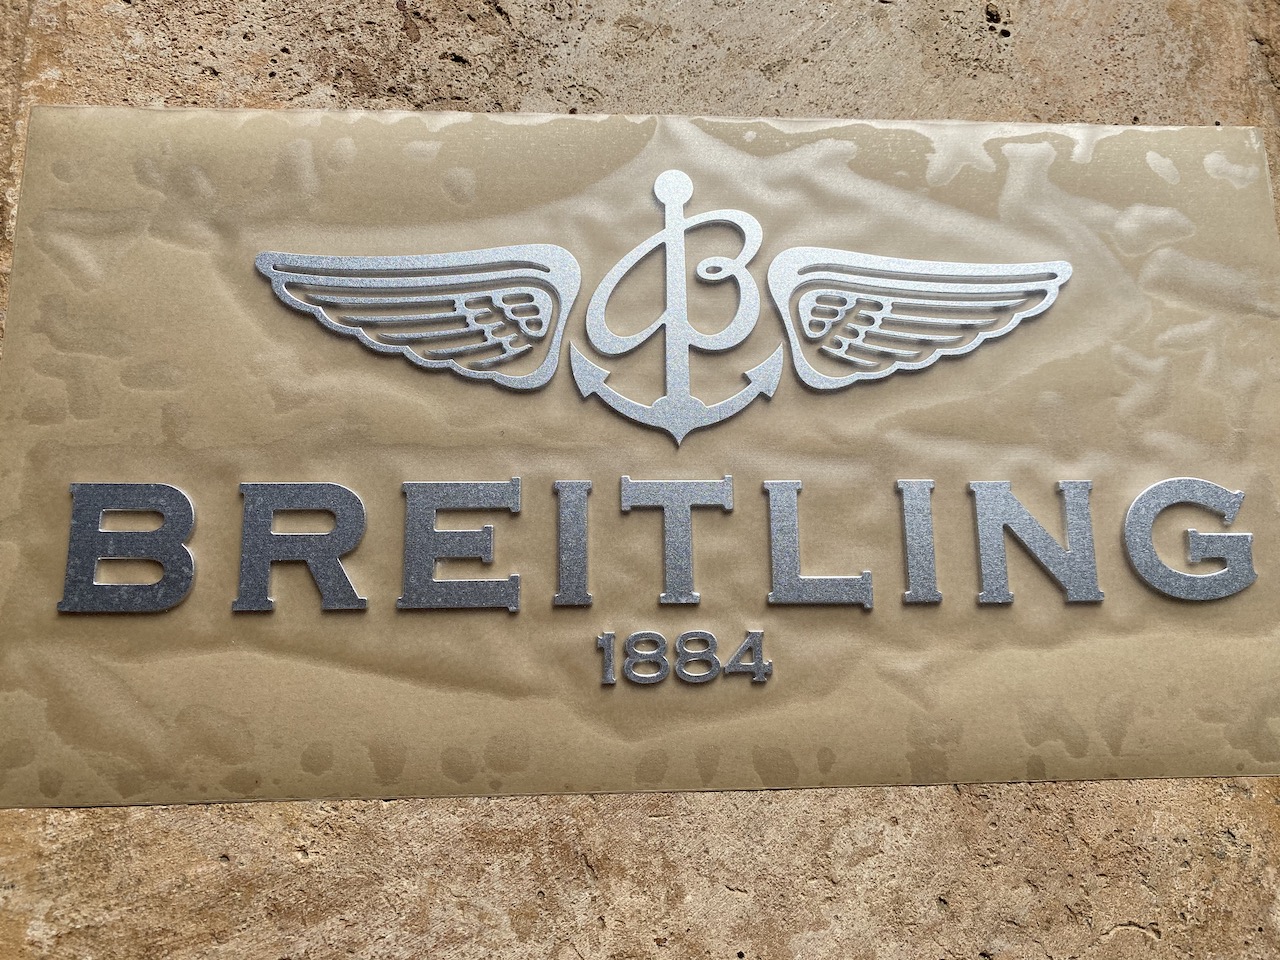 Breitling Logo 1984 Letters Silver 2010s - www.joseph-watches.com